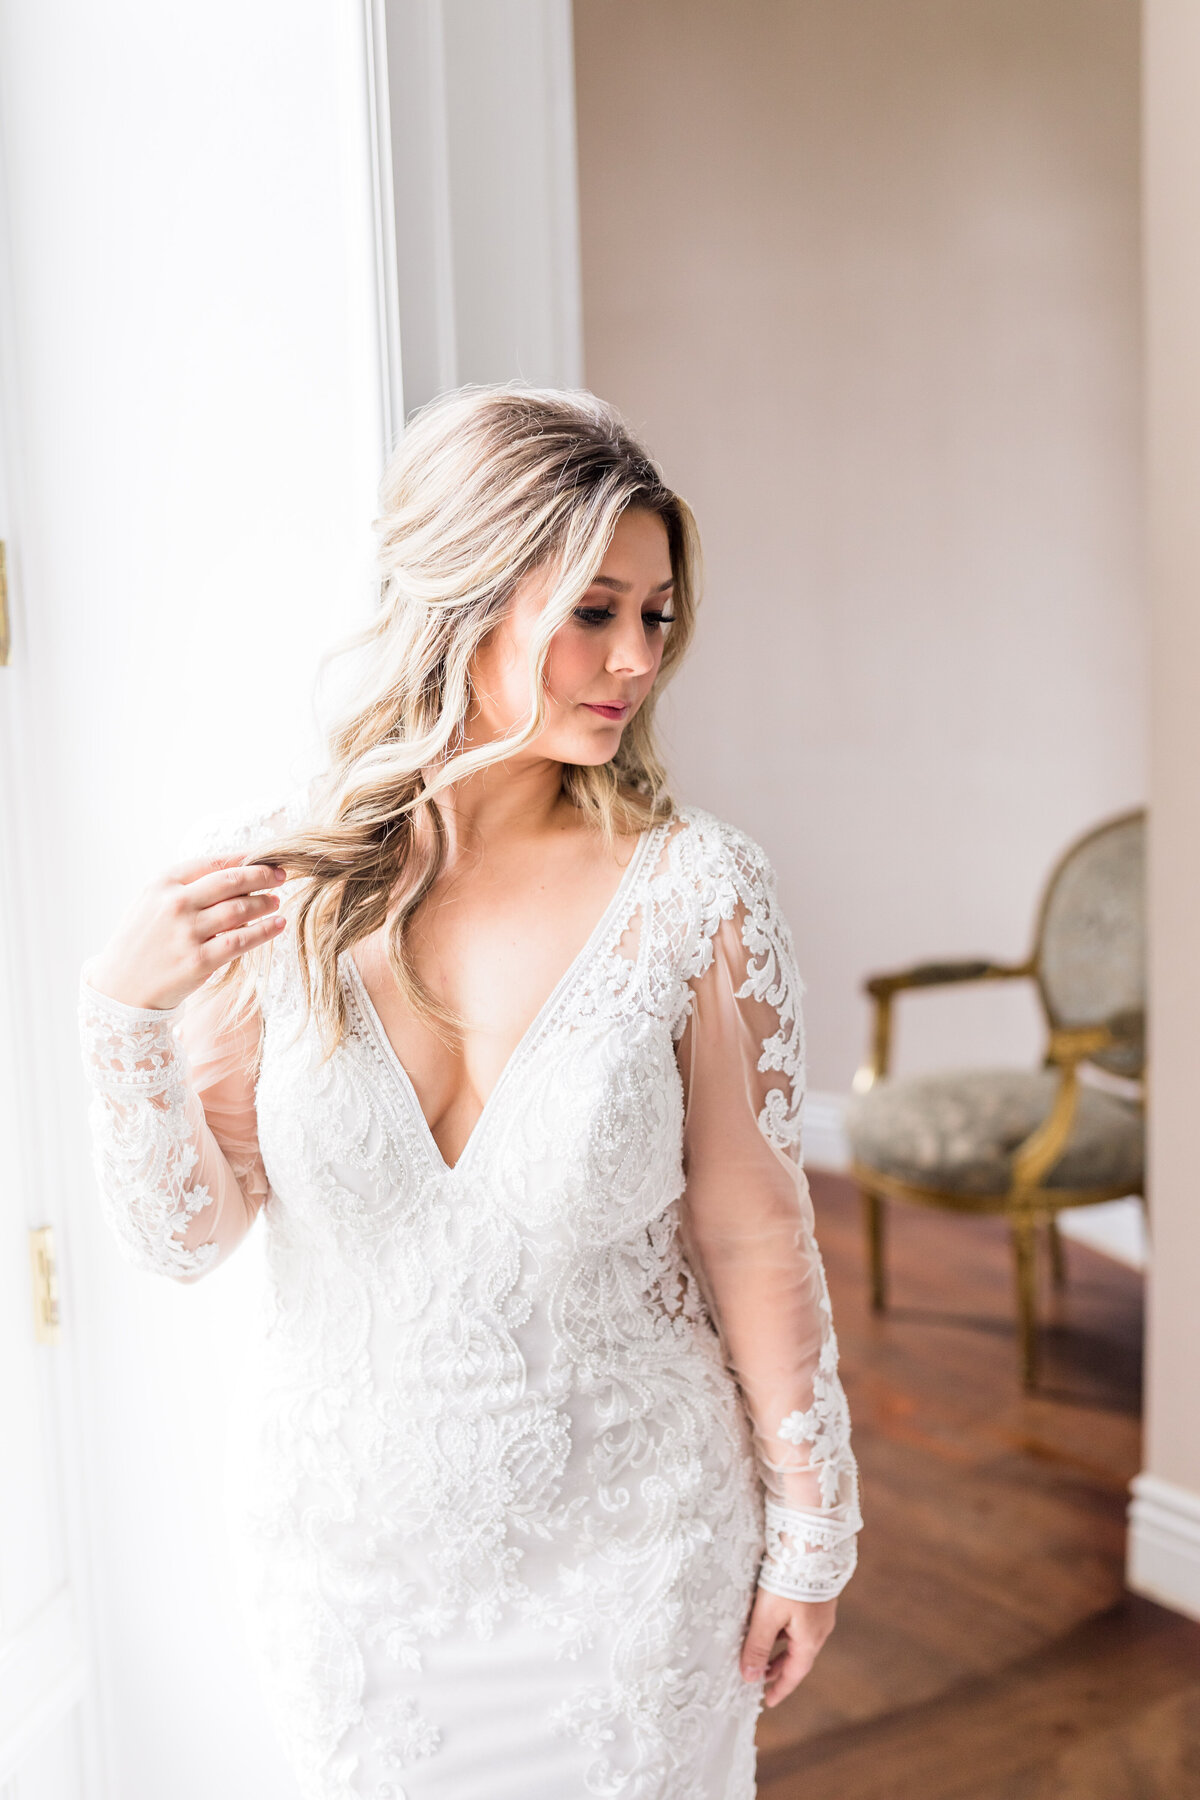 Luxury Bride gets ready before Wedding Day Ceremony